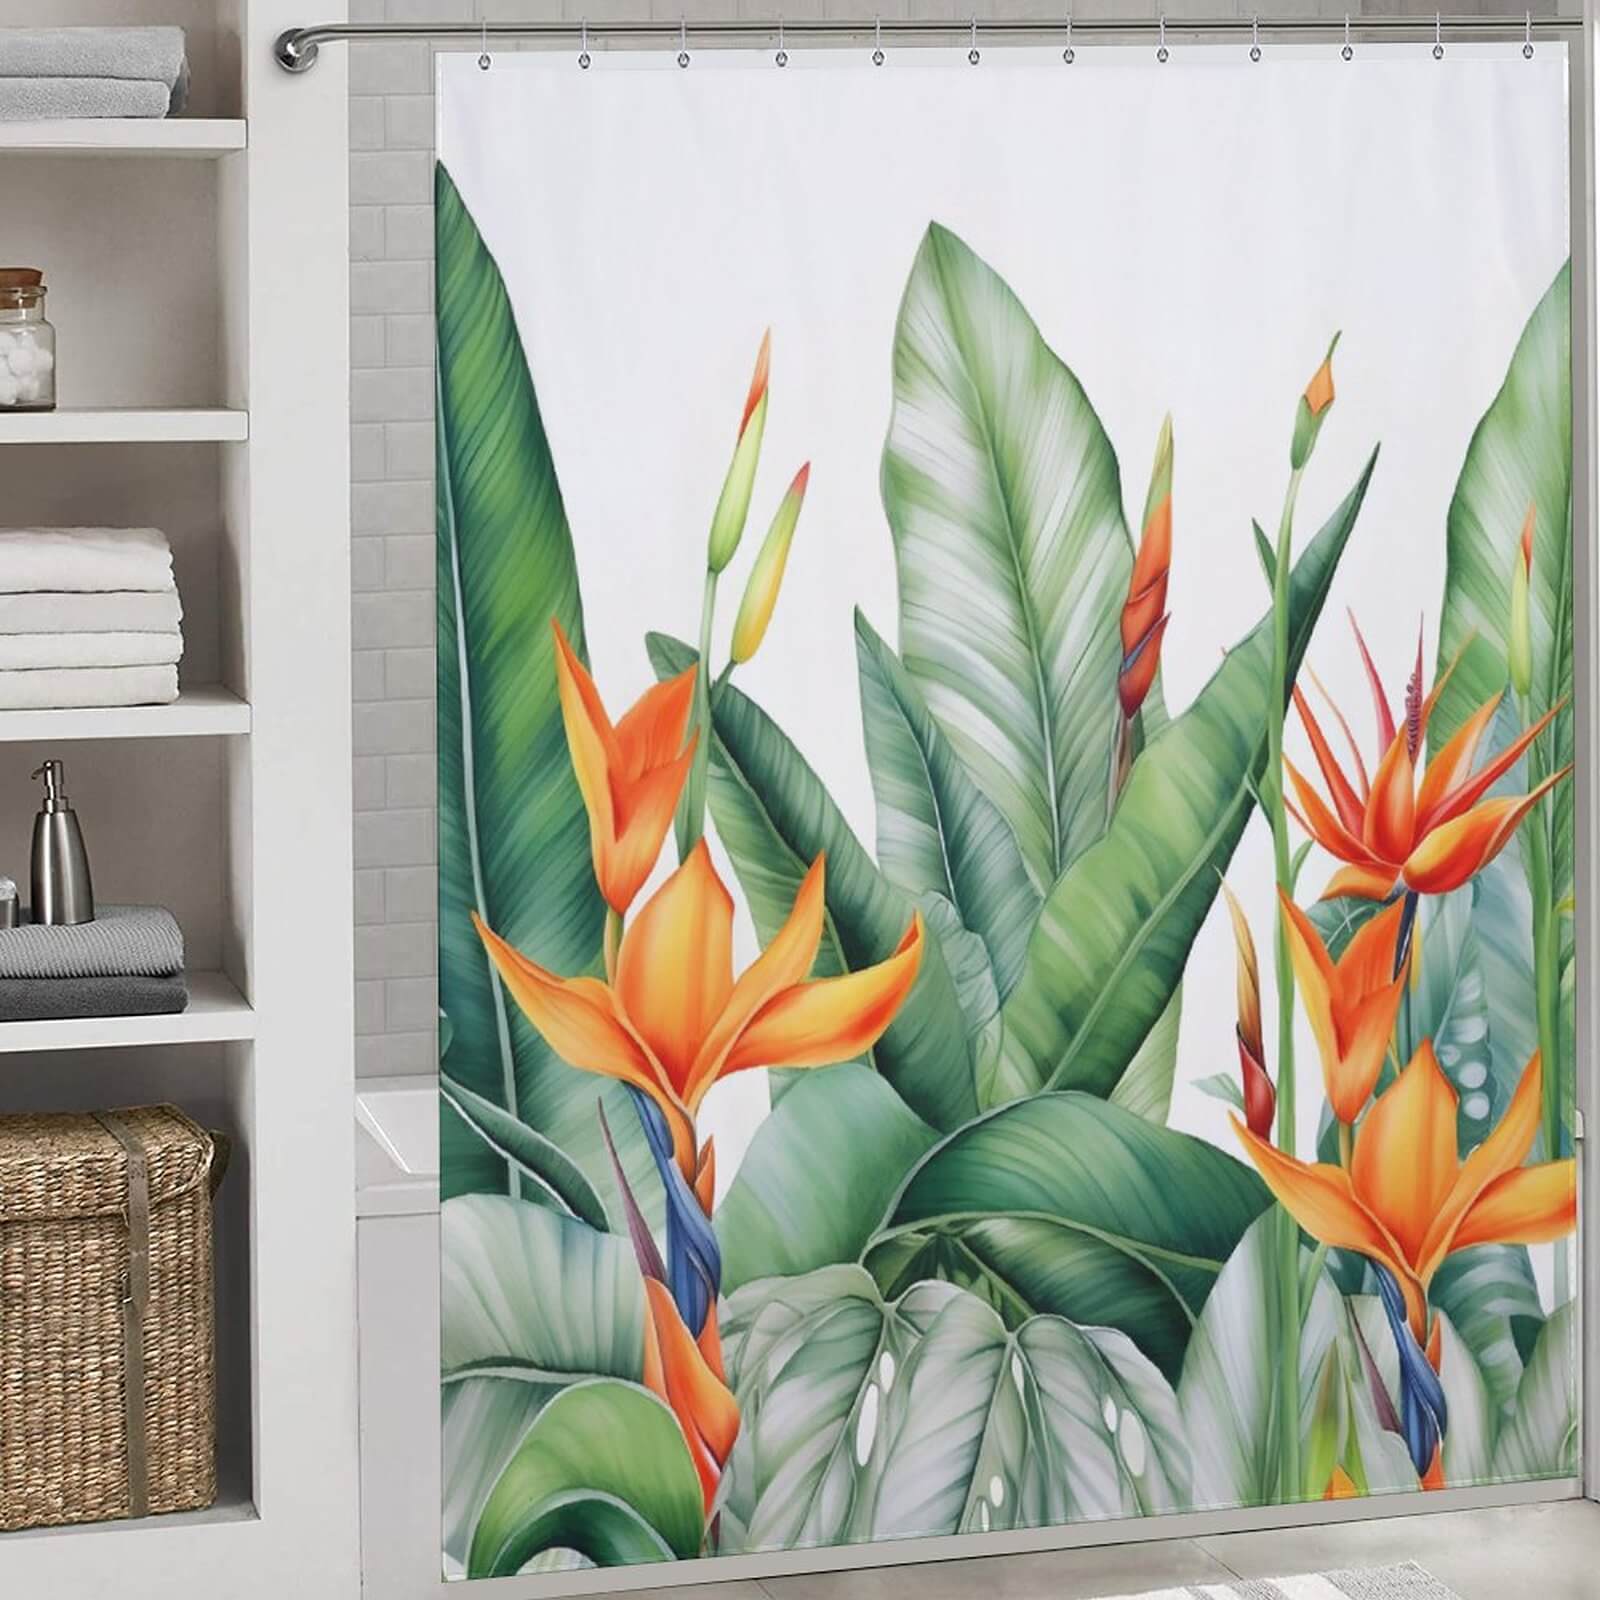 Botanical Jungle Shower Curtain-Cottoncat with a touch of jungle vibe, inspired by the vibrant Bird of Paradise motif.